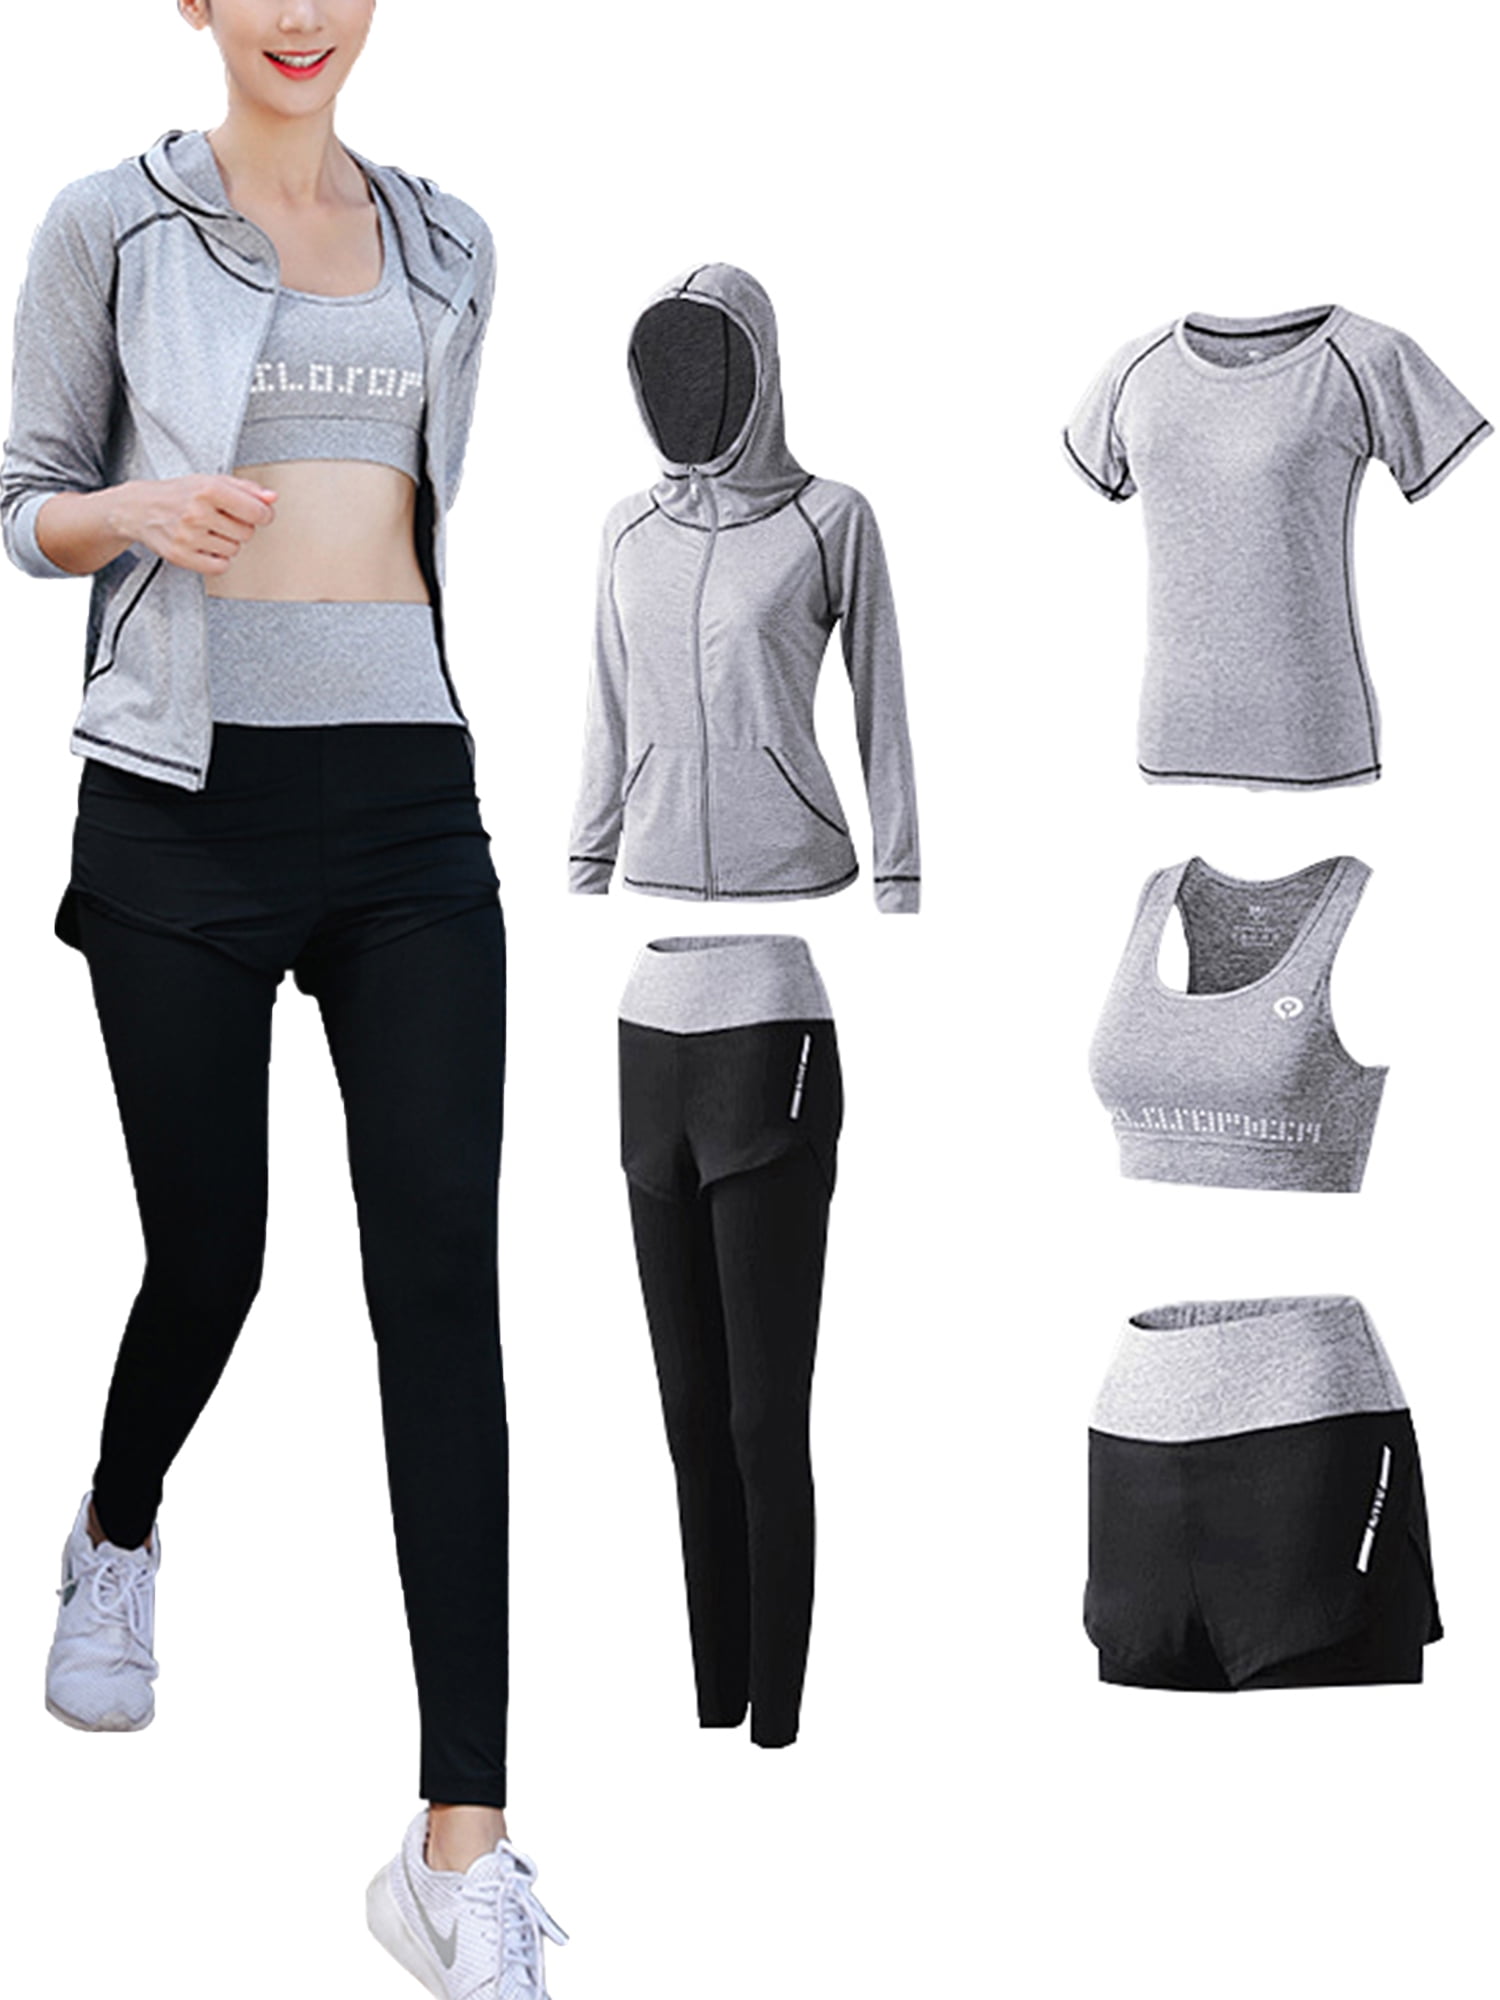 Sport Suits Activewear Set Athletic Tracksuits Sportswear Fitness Running Jogging Gym Fitness Outfit Workout Sweatsuit 5 Piece Set GYUANLAI Womens 5pcs Yoga Suit